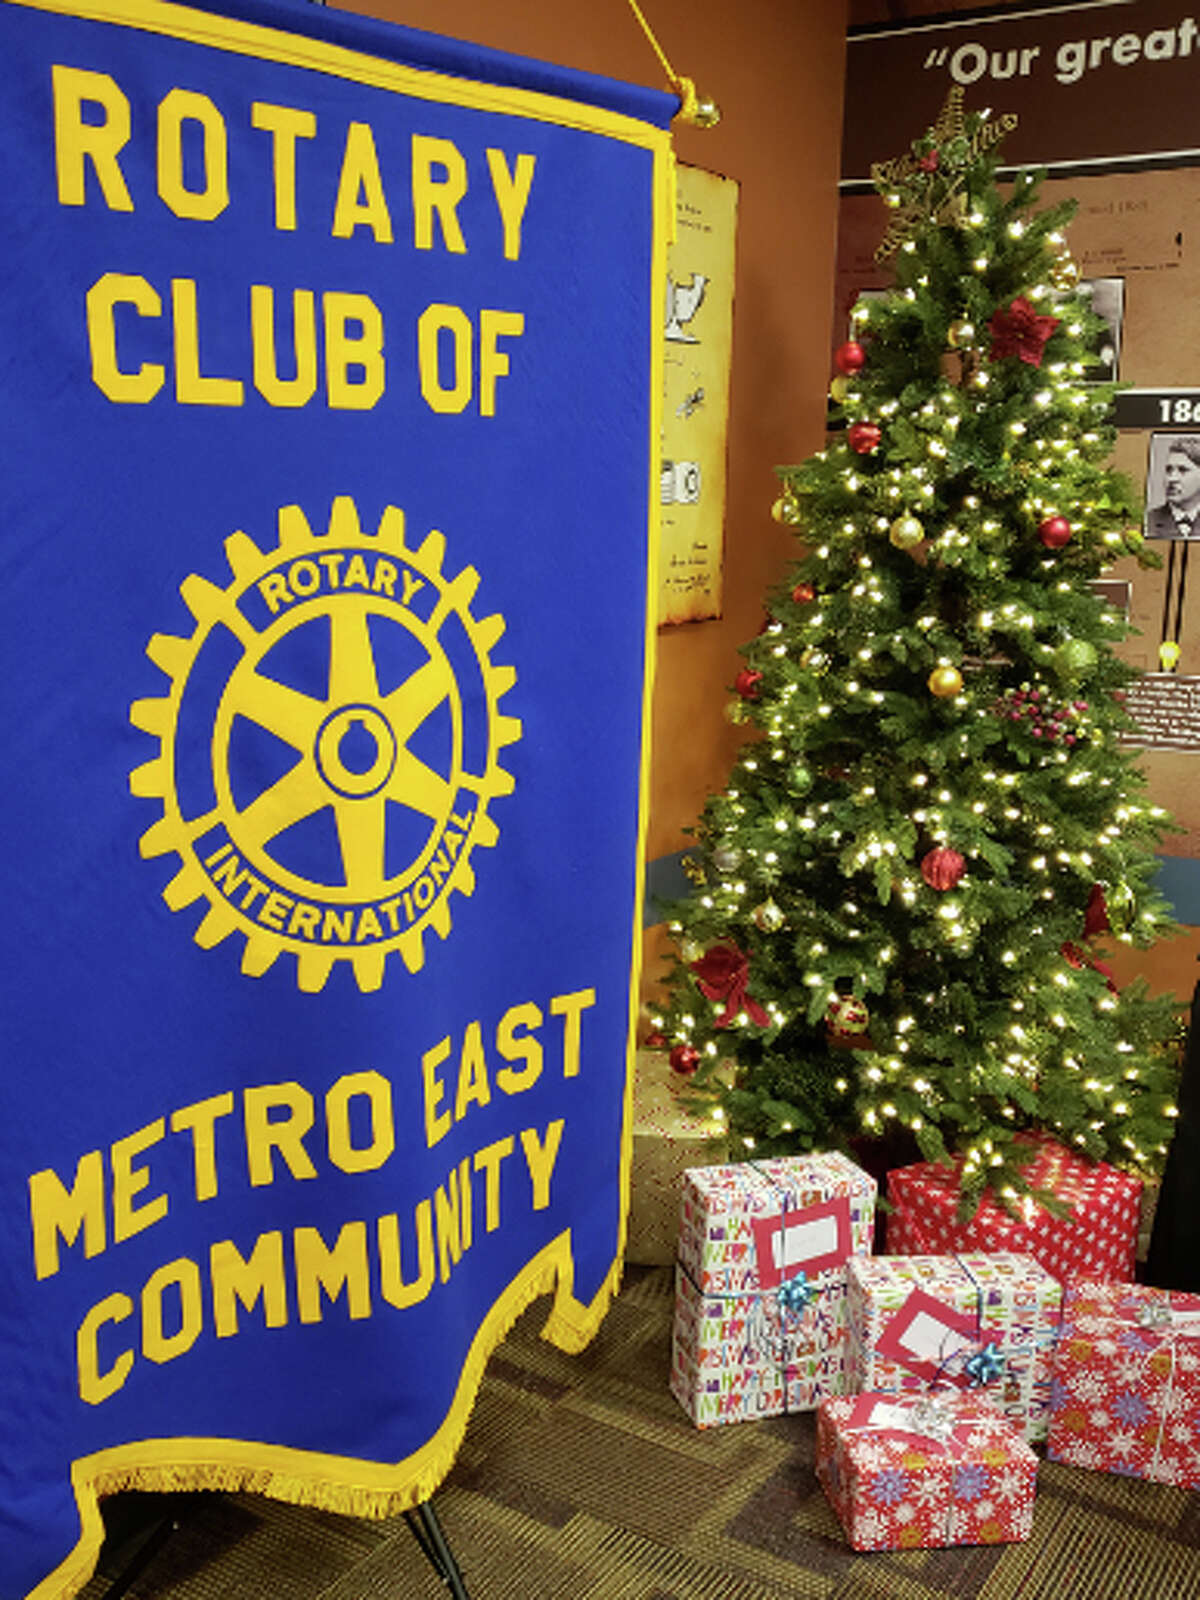 The Metro East Community Rotary Club is holding its fifth annual Veterans Christmas event on Tuesday, Dec. 7 at Bella Milano. 